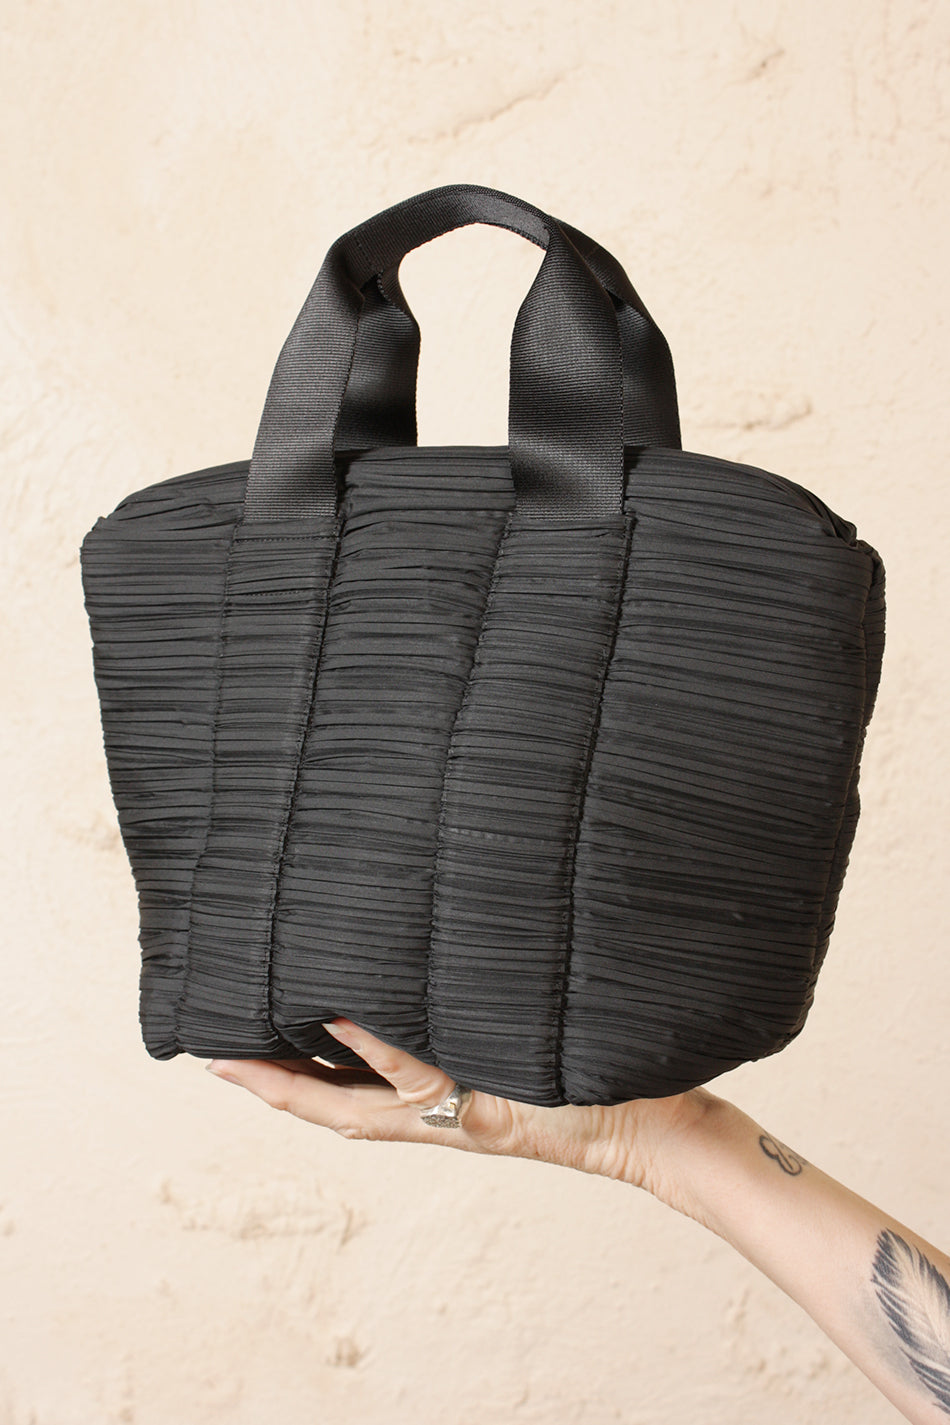 Pleated Carrybag Small Black